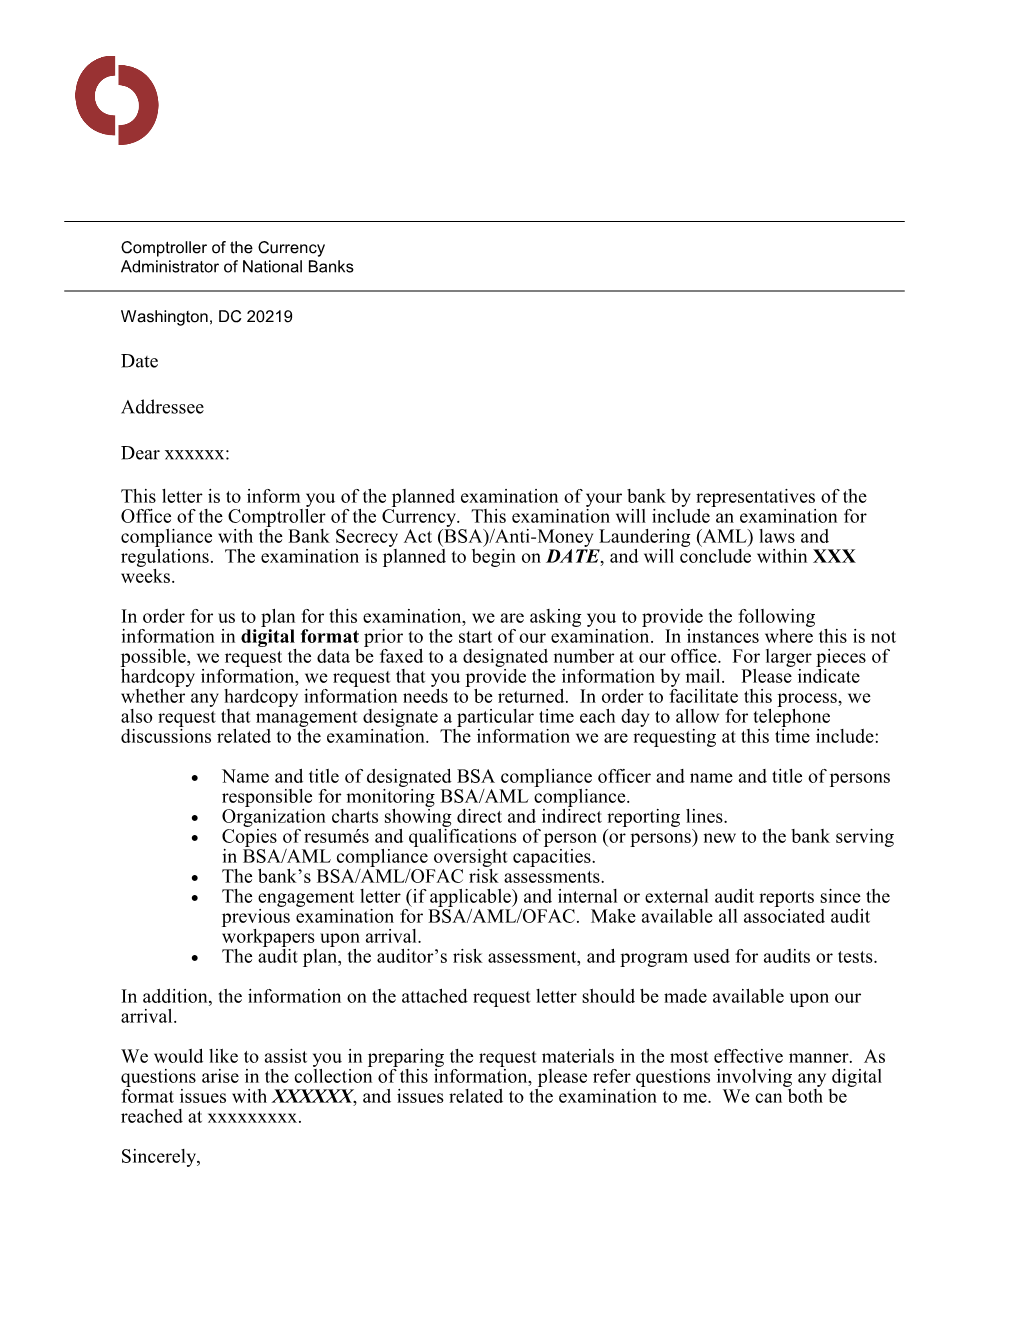 Request Letter Cover Letter